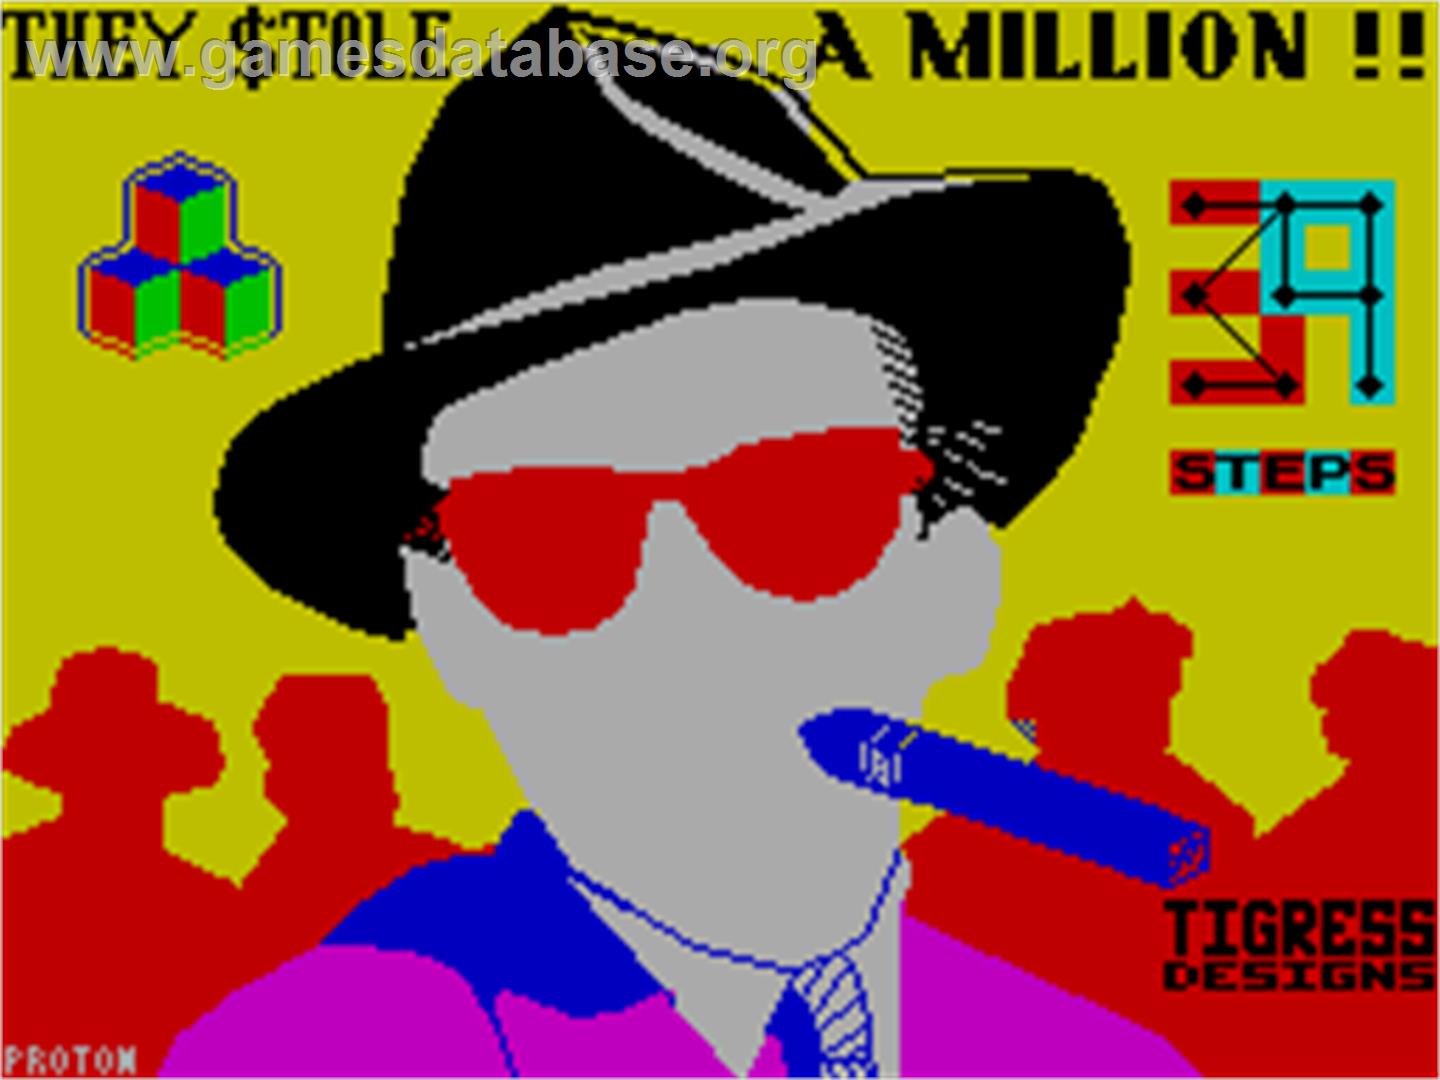 They Sold a Million 3 - Sinclair ZX Spectrum - Artwork - Title Screen